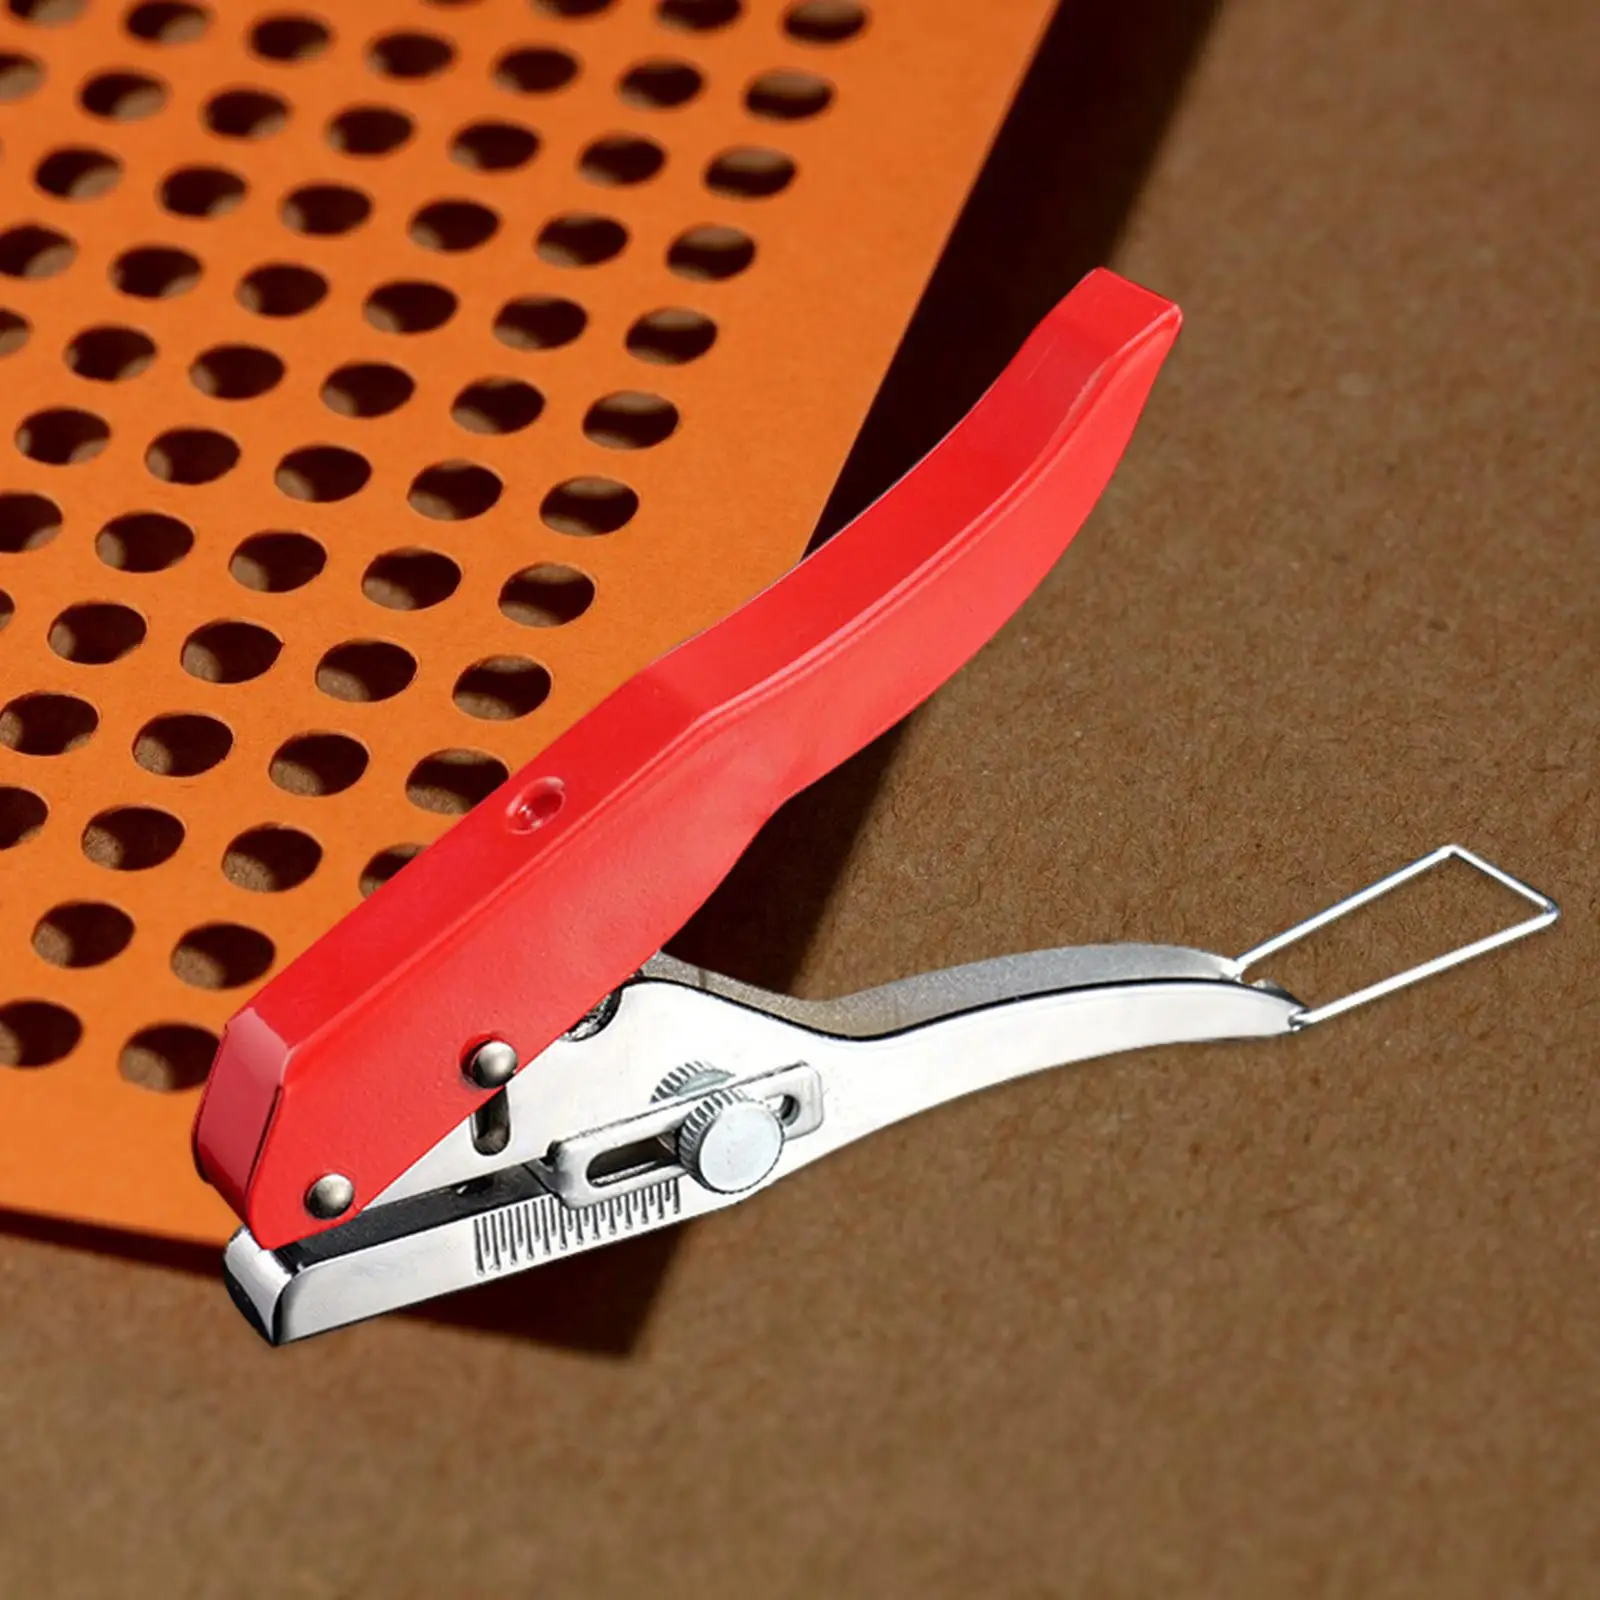 Single Hole Punch with Scale Portable Metal Paper Puncher 8mm Hole Punching Pliers for Craft Paper Hard Film Paper Card Project